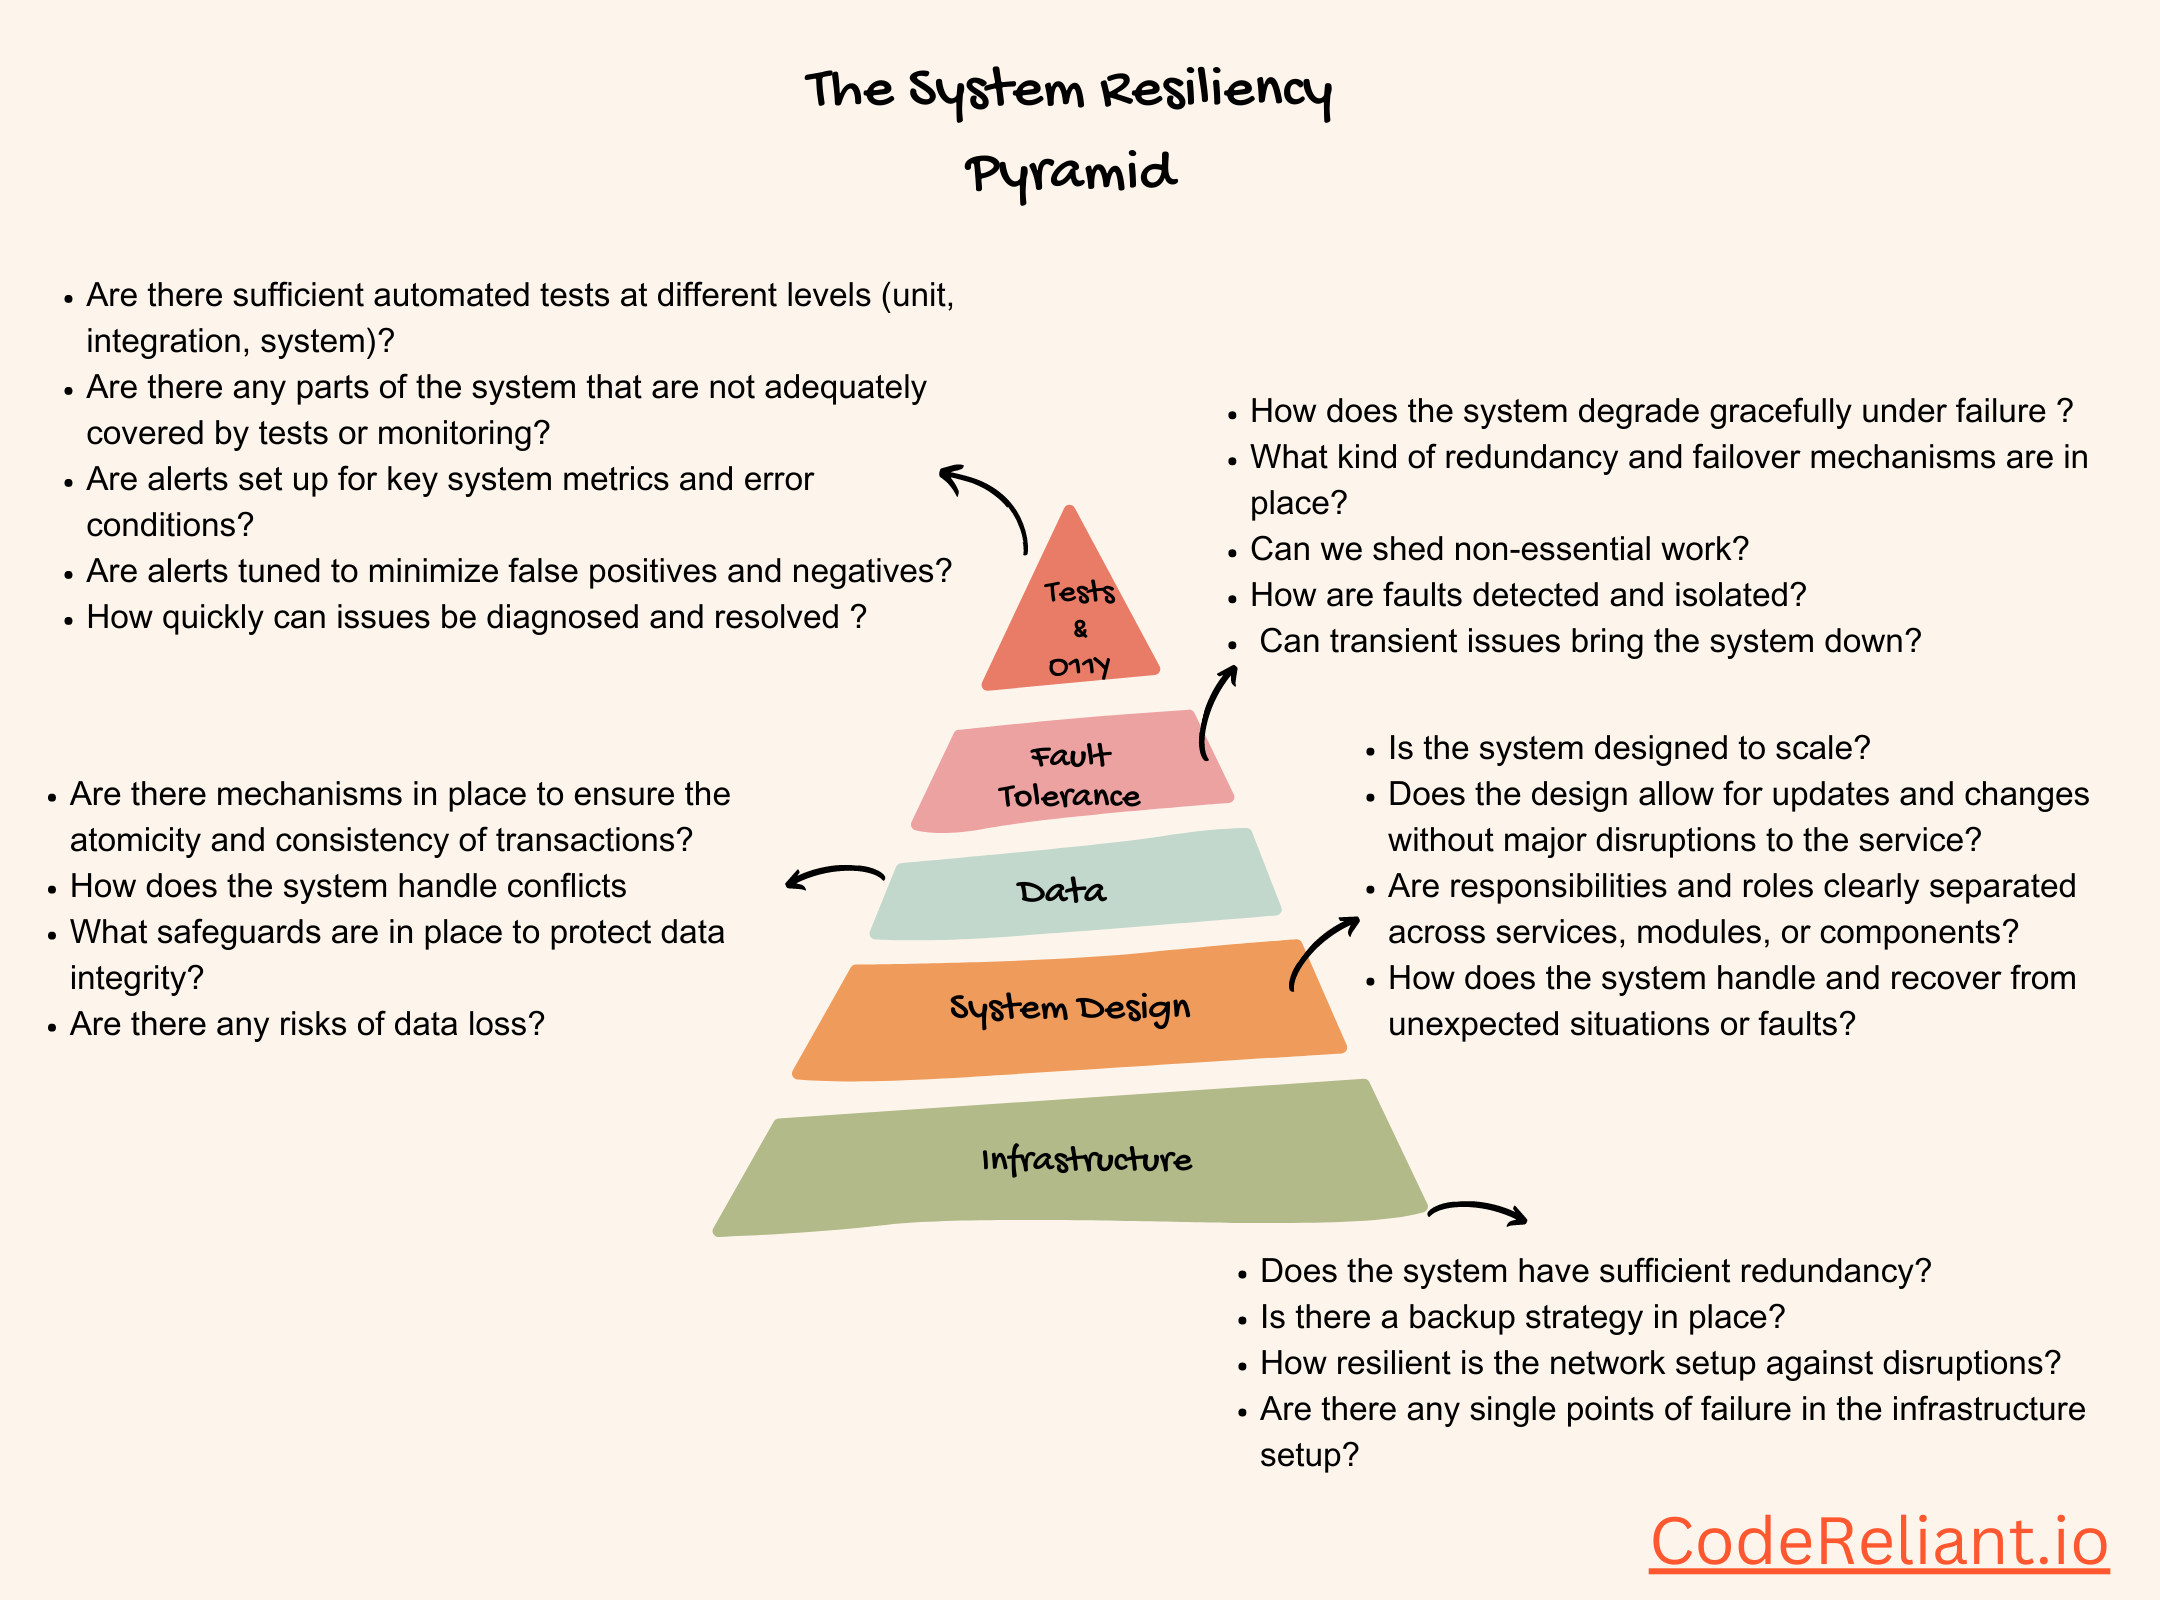 The System Resiliency Pyramid